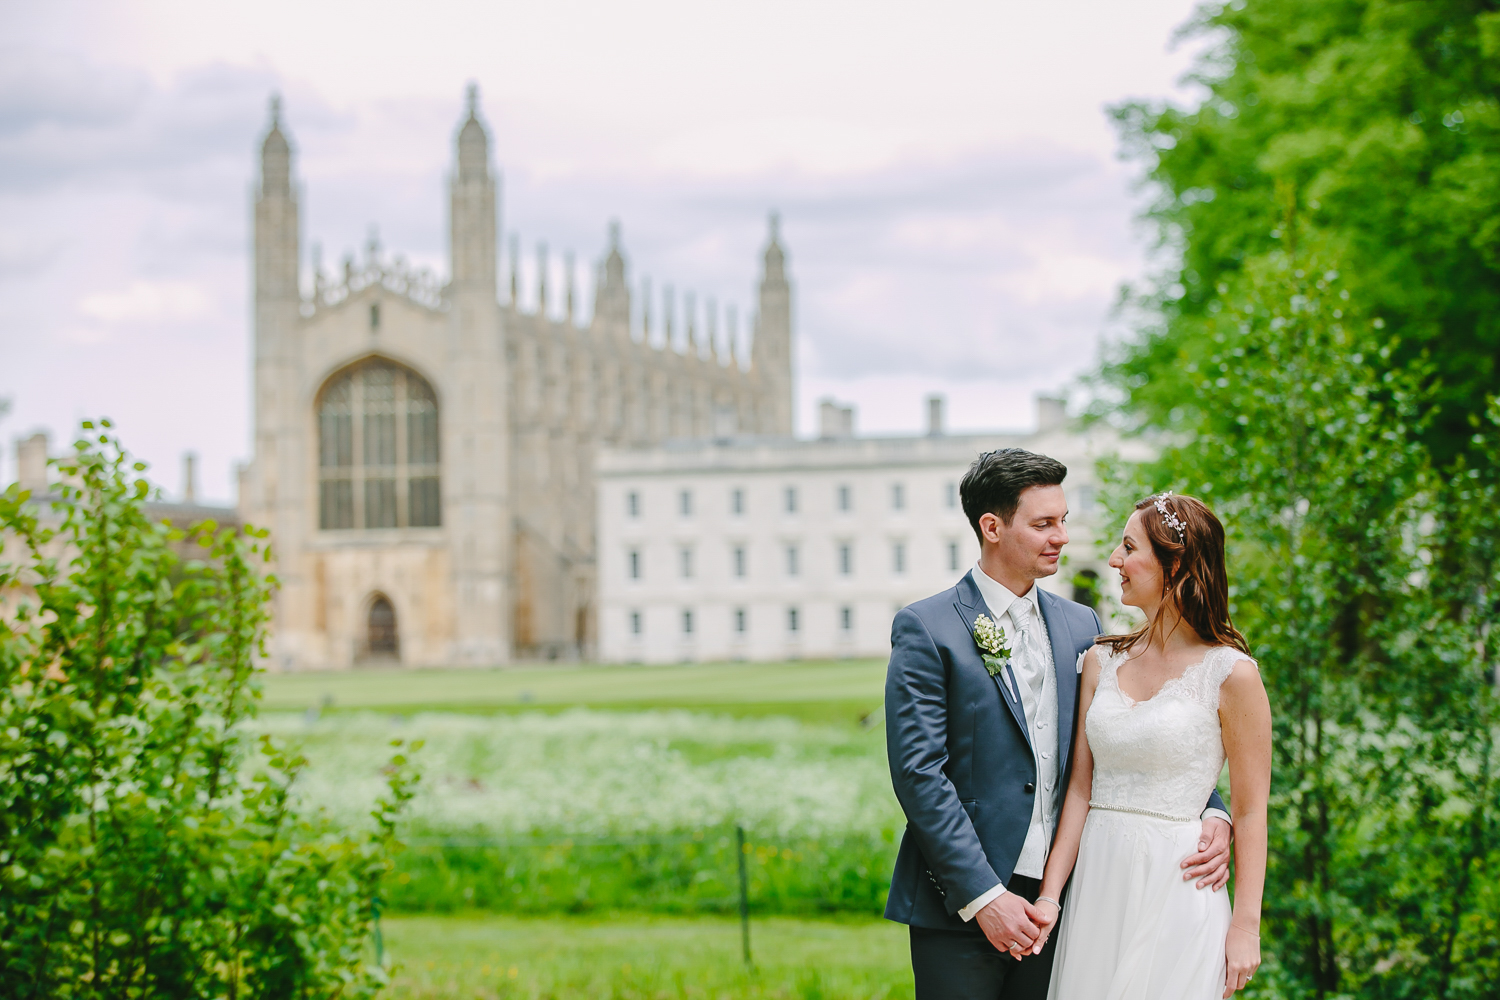 Bride and groom in ront of Kings College Cambridge